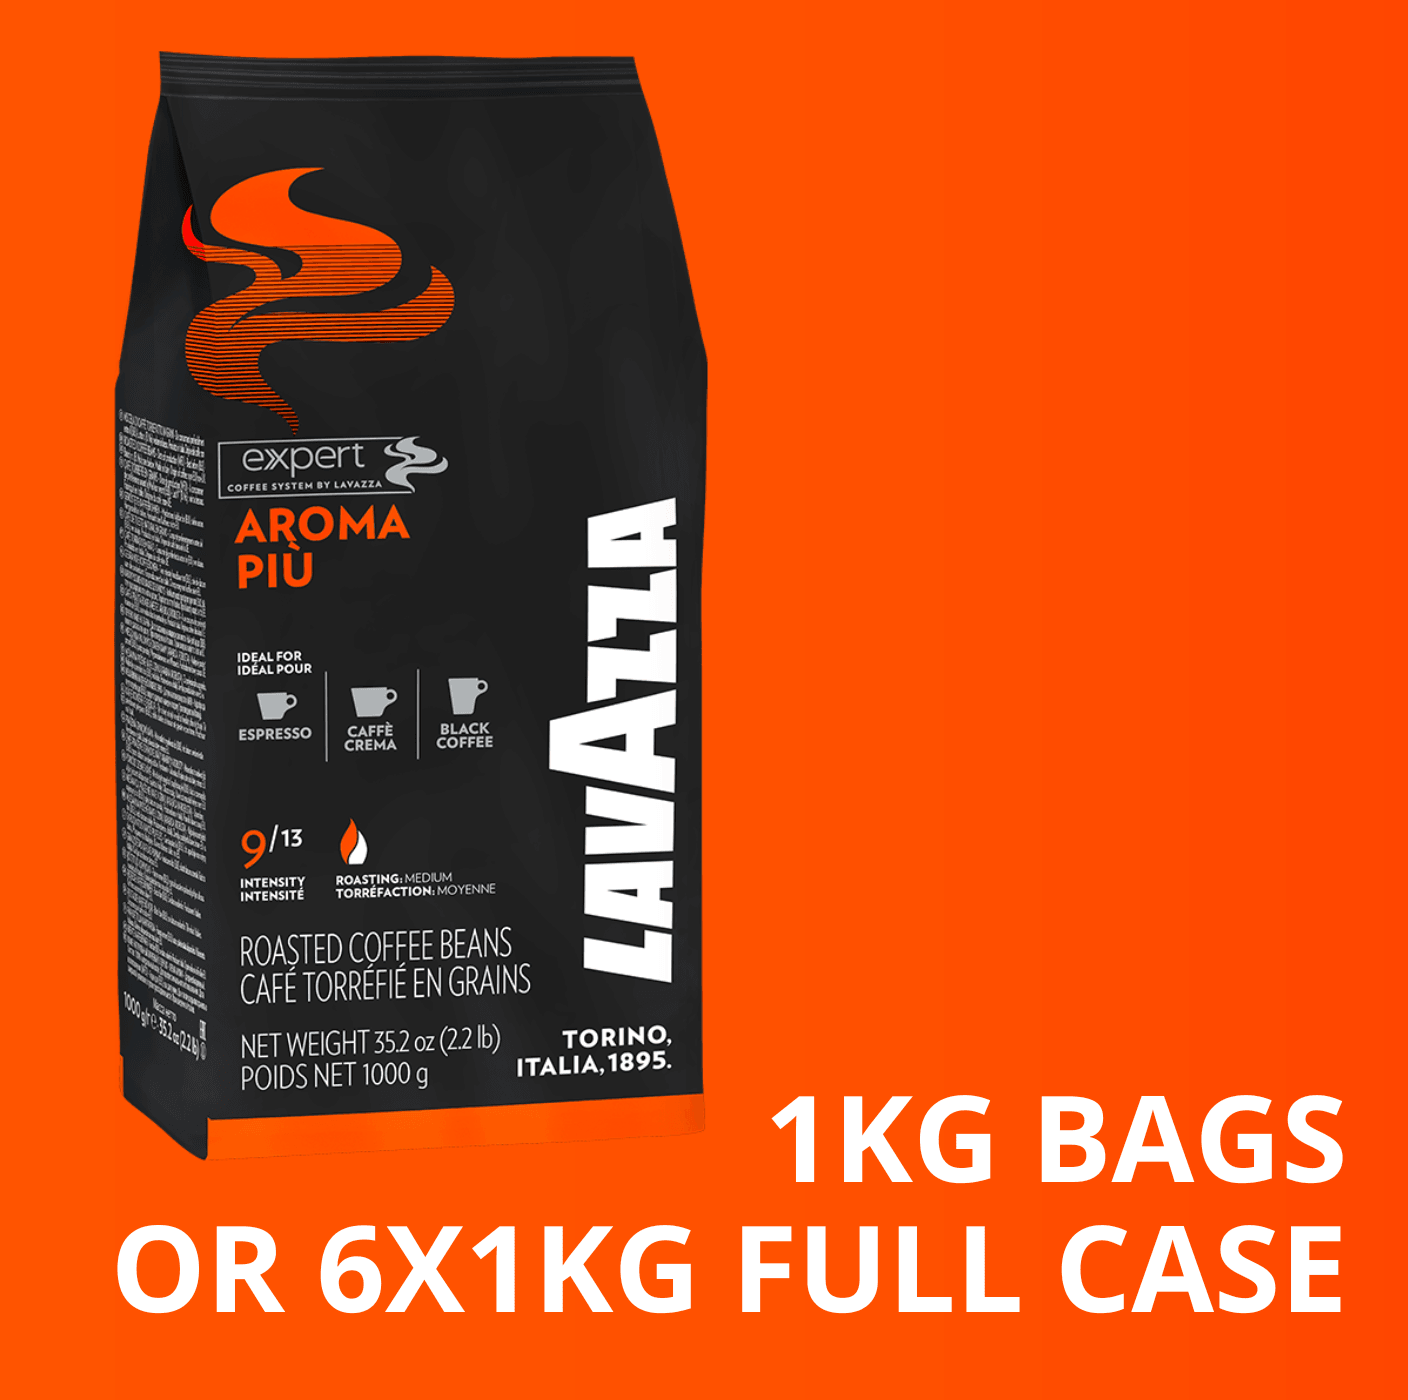 Lavazza Expert Aroma Piu Coffee Beans (1kg Bags or Full Case) - Vending Superstore